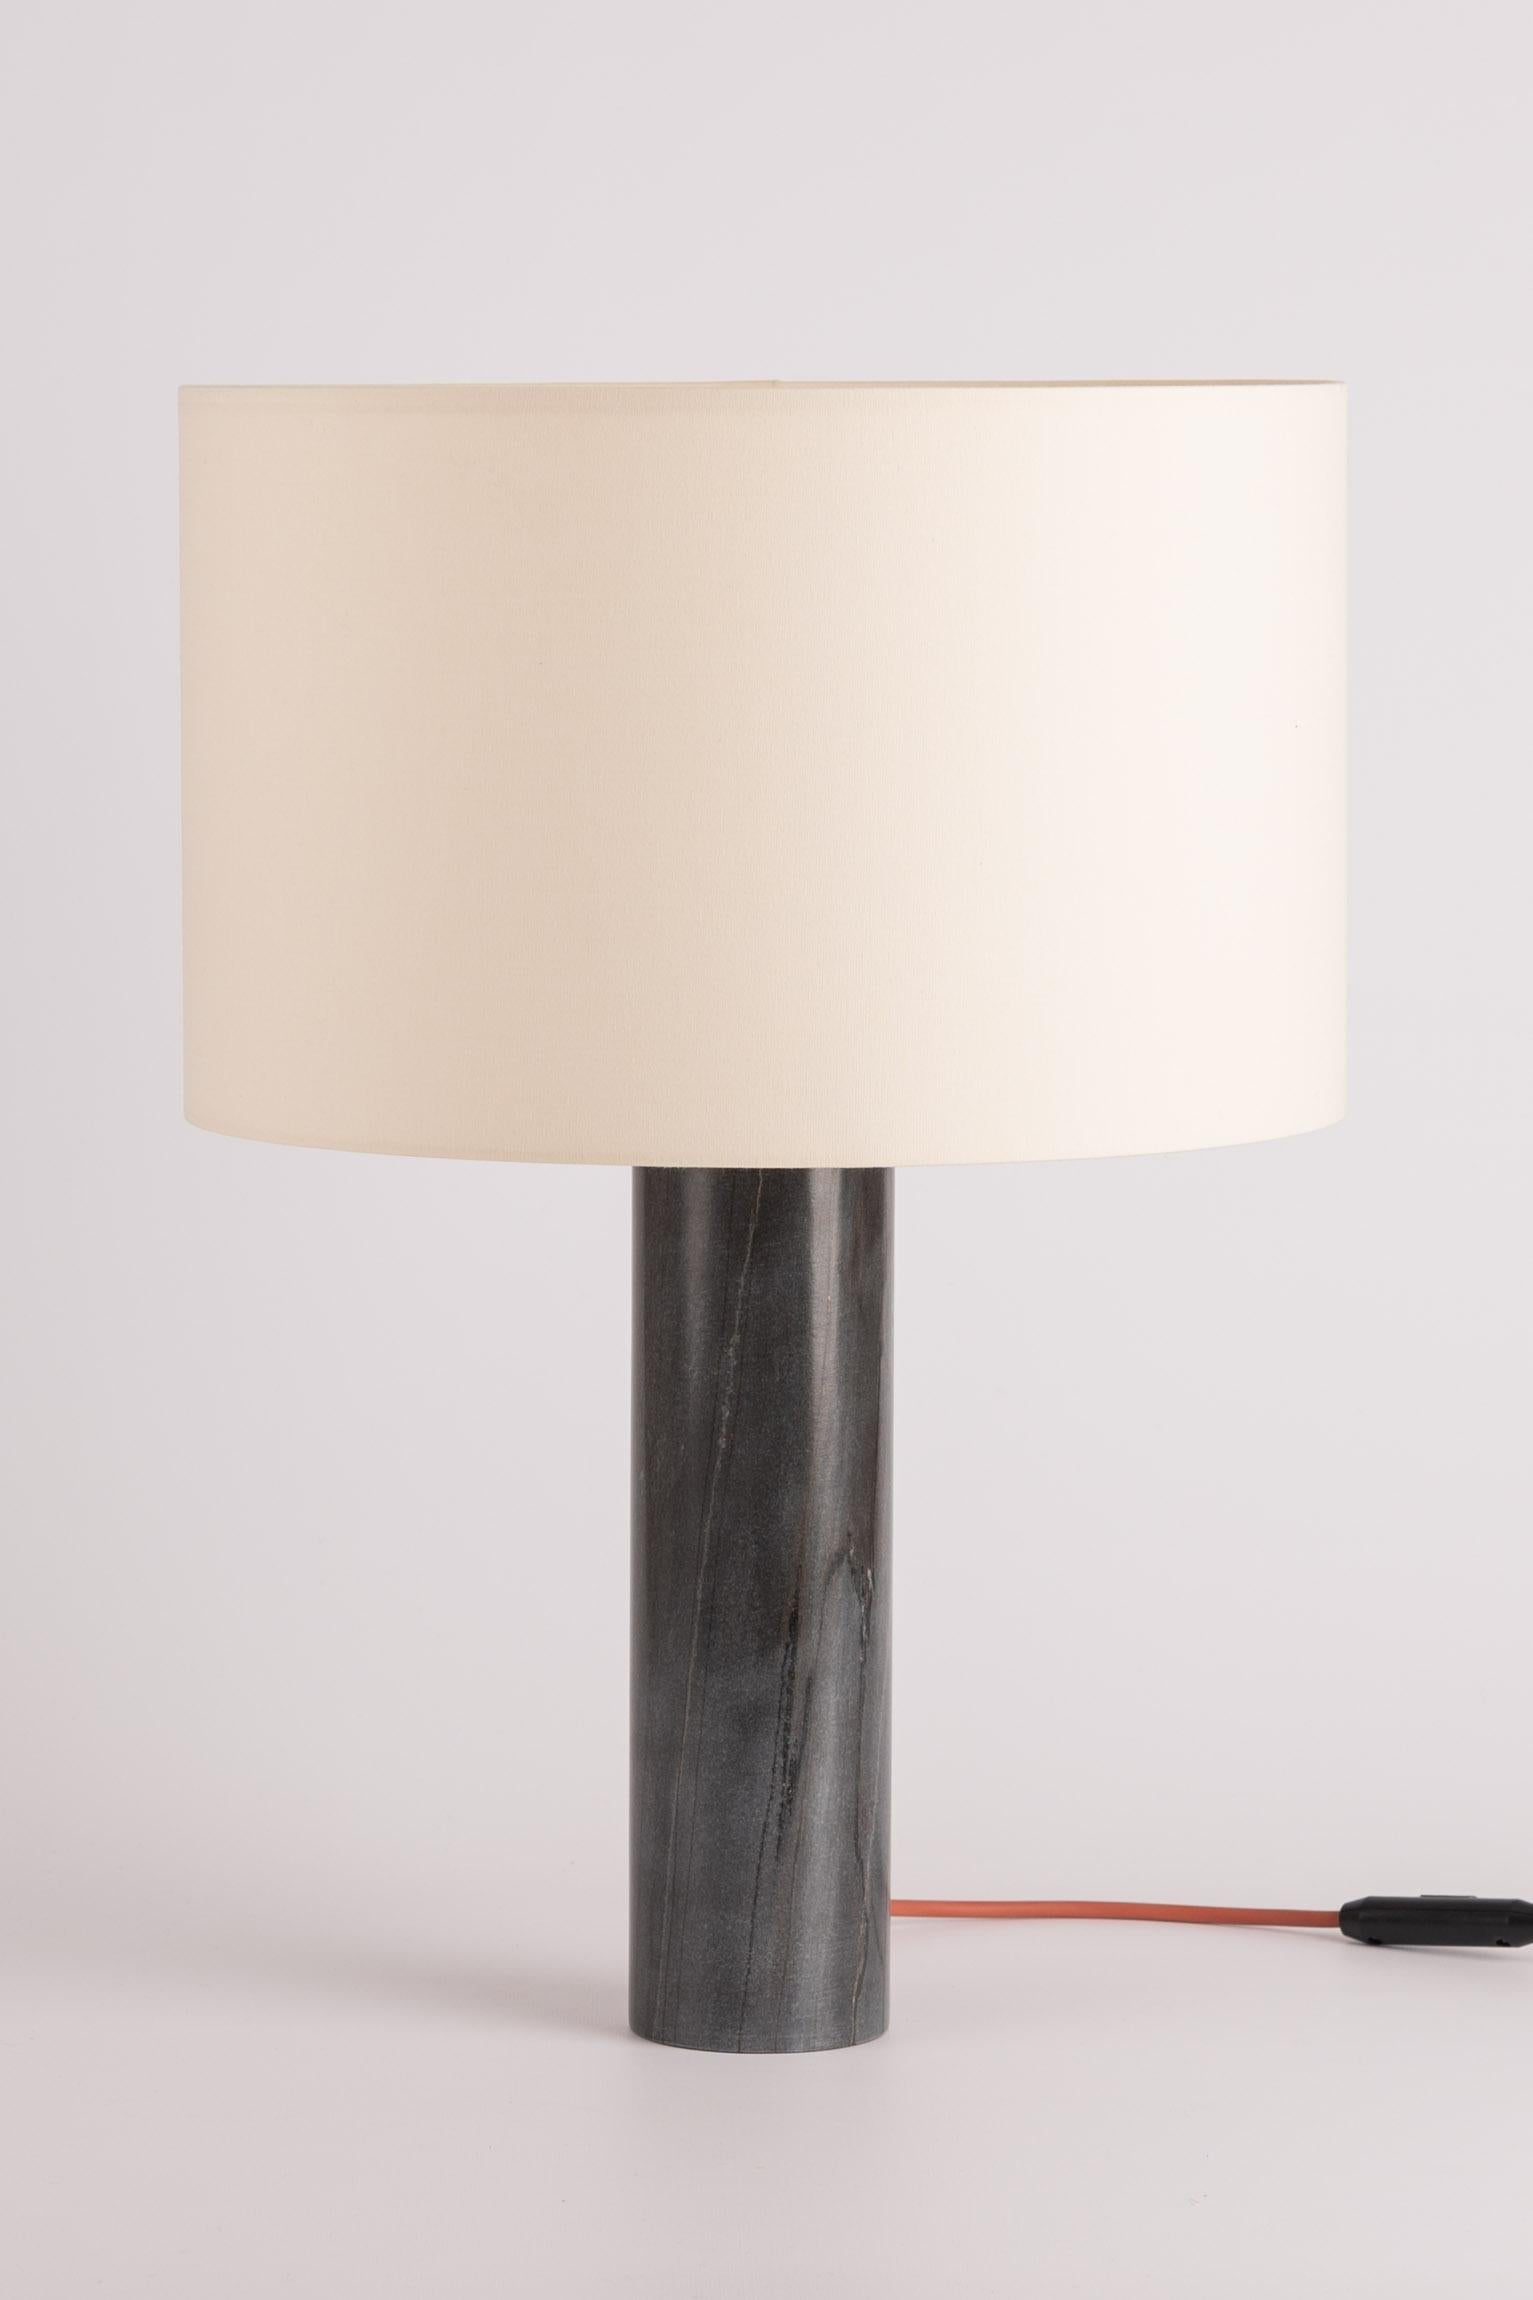 Black Marble Pipo Table Lamp by Simone & Marcel
Dimensions: Ø 40 x H 58 cm.
Materials: Cotton and black marble.

Also available in different marble and wood options and finishes. Custom options available on request. Please contact us. 

All our